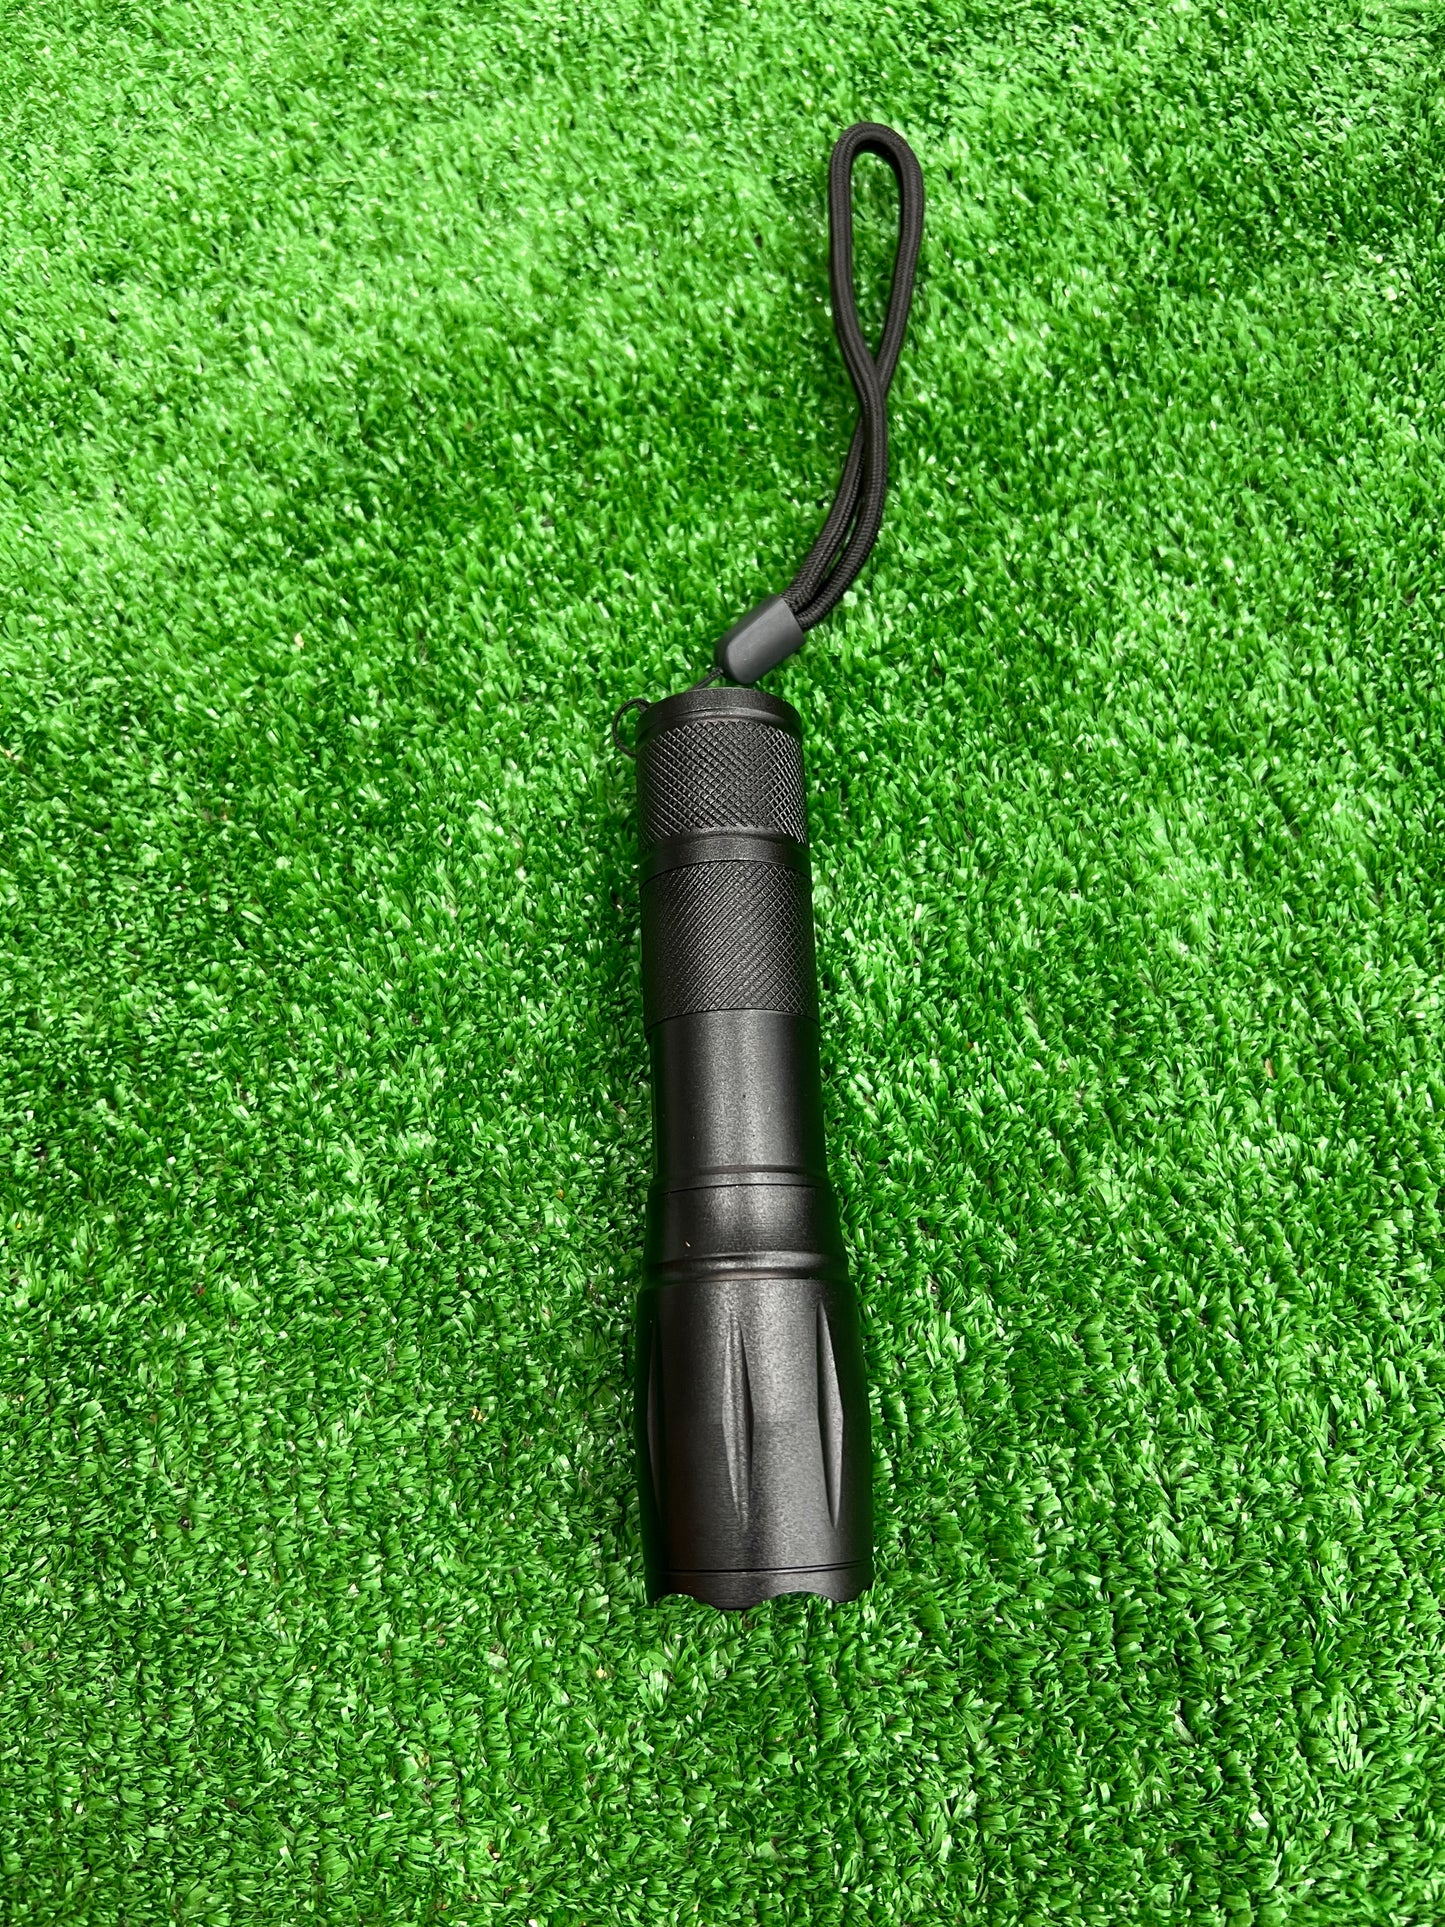 Red LED torch with zoom function.